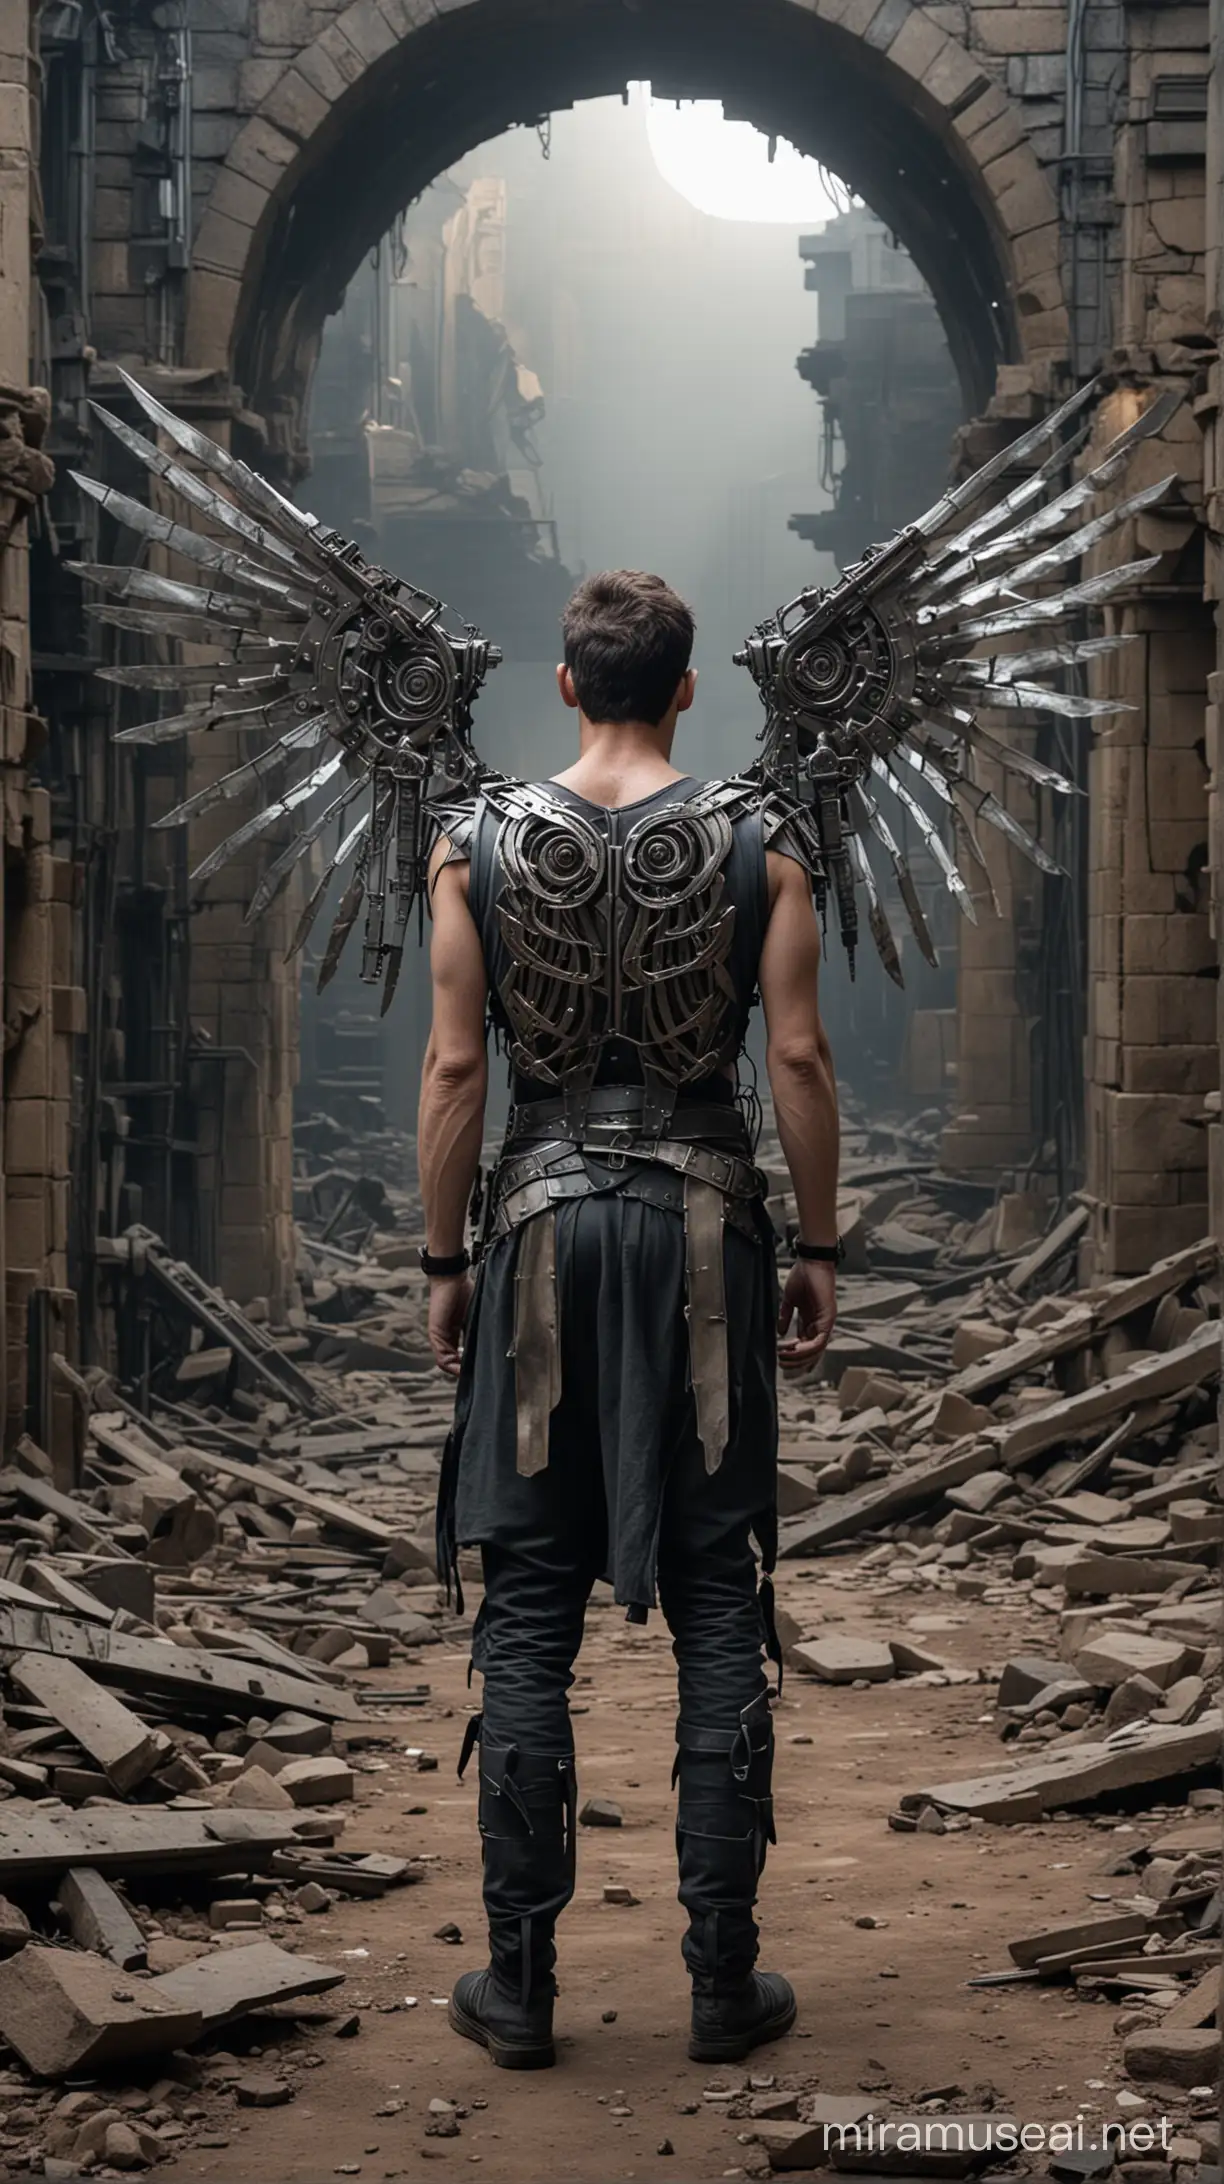 an injured man standing in front of the ruins of a labrynth, mechanical metal wings strapped to his back, it is night, his back is to us